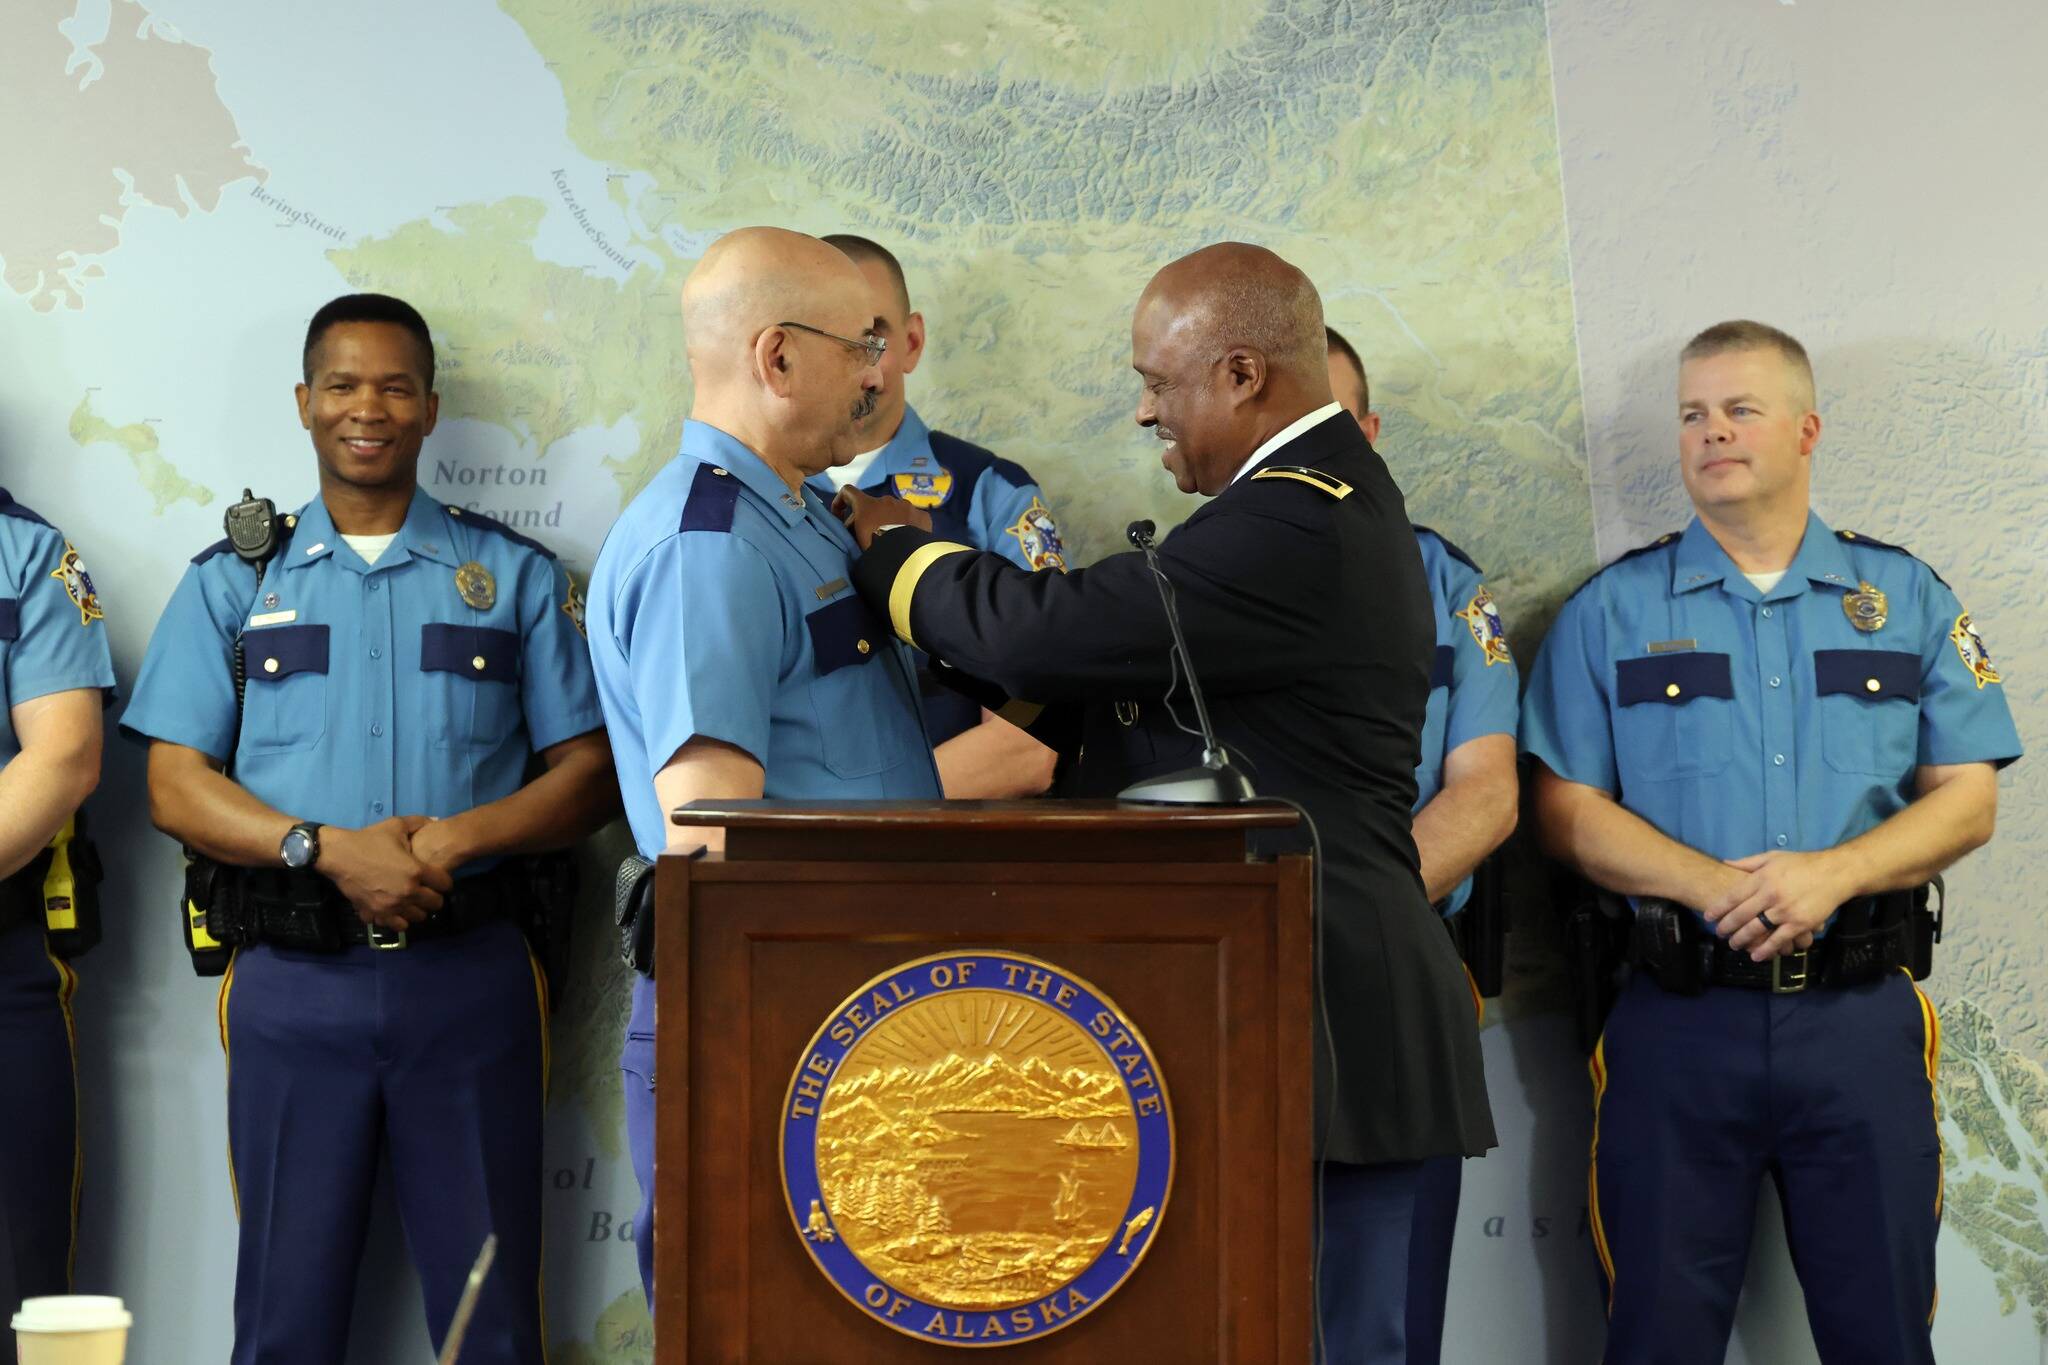 Alaska Defense Force Brig. Gen. Simon Brown pins a badge on Maurice “Mo” Hughes, left, who was promoted from commander of A Detachment to colonel of the Alaska State Troopers during a press conference on Wednesday, Aug. 31, 2022, in Anchorage, Alaska. (Photo courtesy Alaska State Troopers)